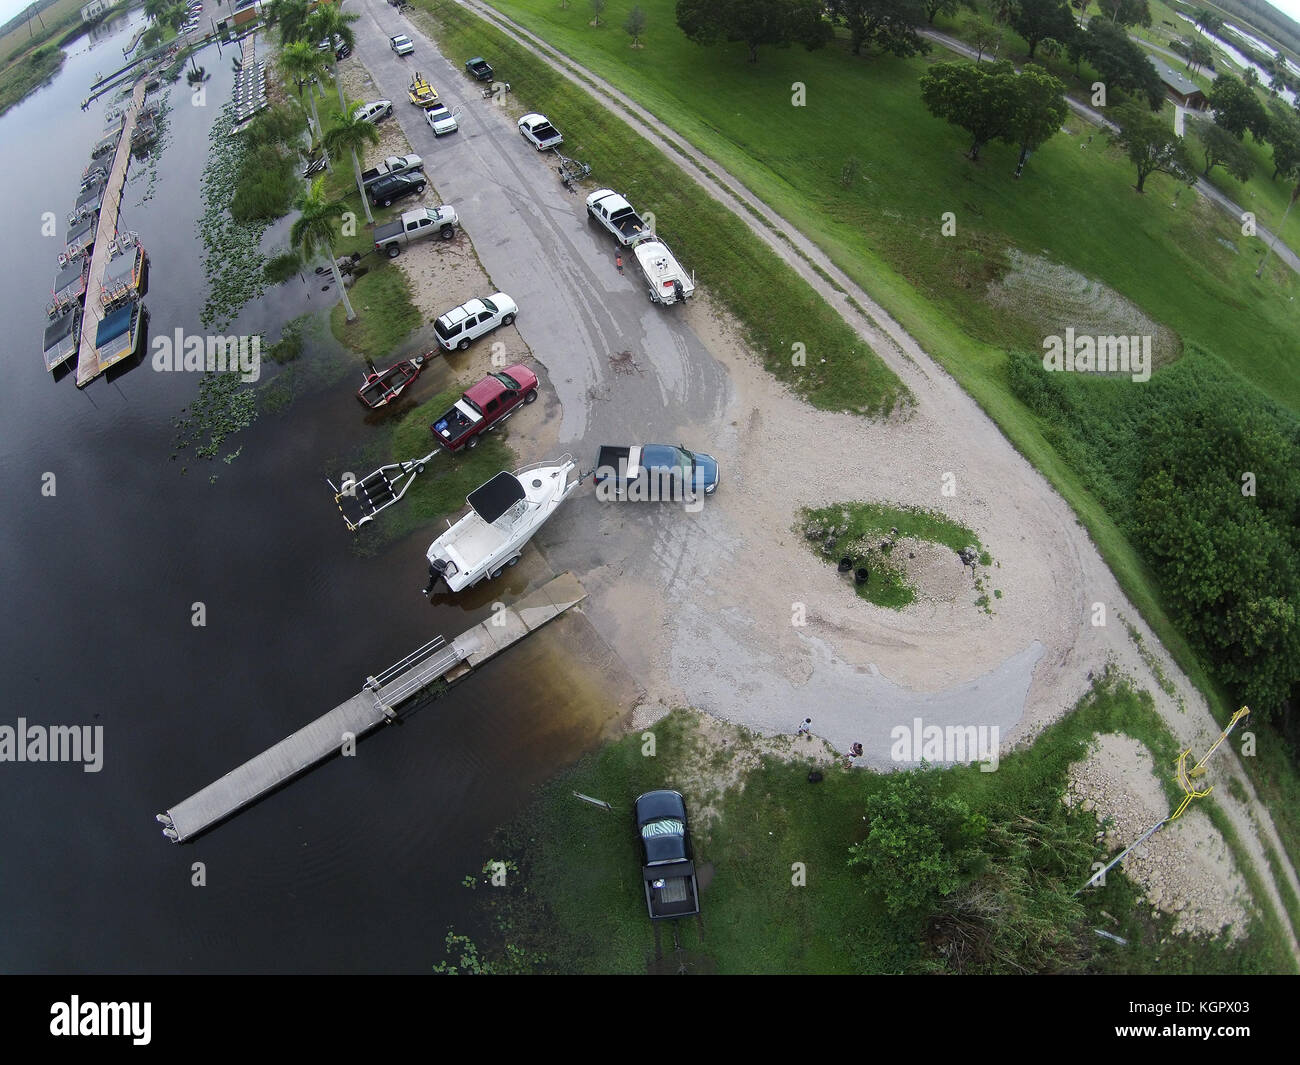 Boat ramp in the Florida Everglades seen from above Stock Photo